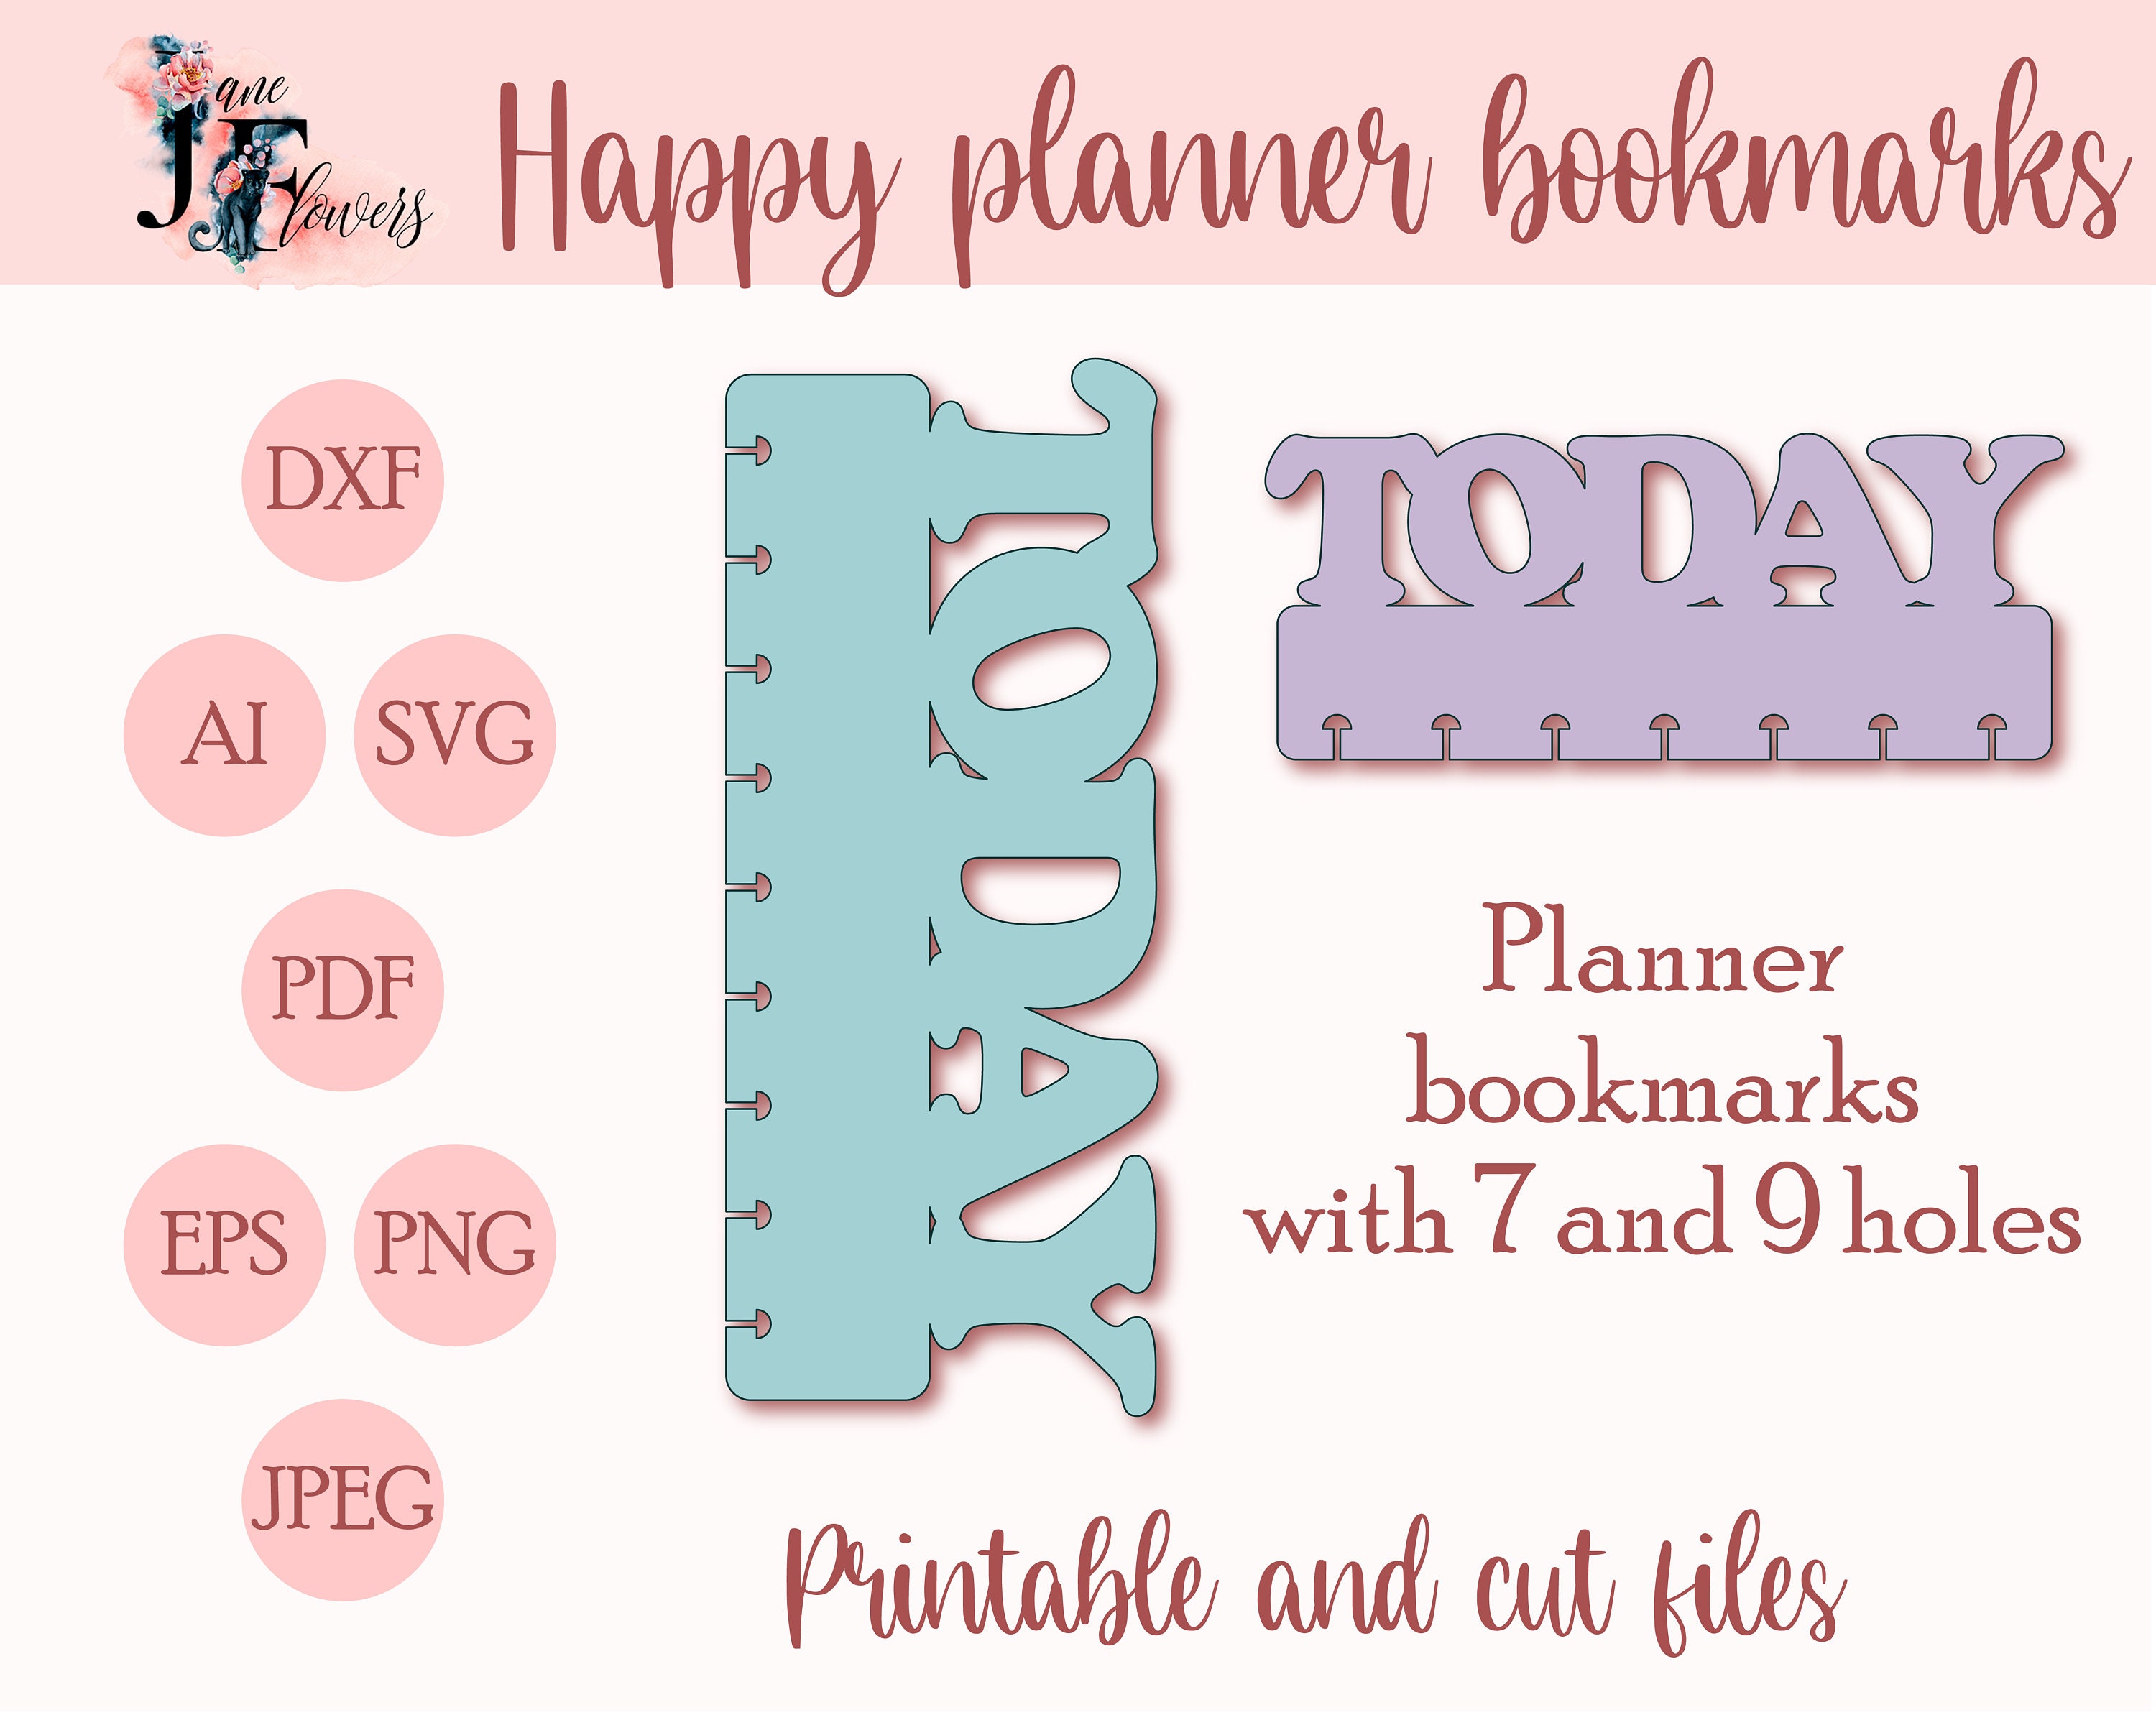 Summer Today Printable Page Marker for The Happy Planner – The Paper Hen